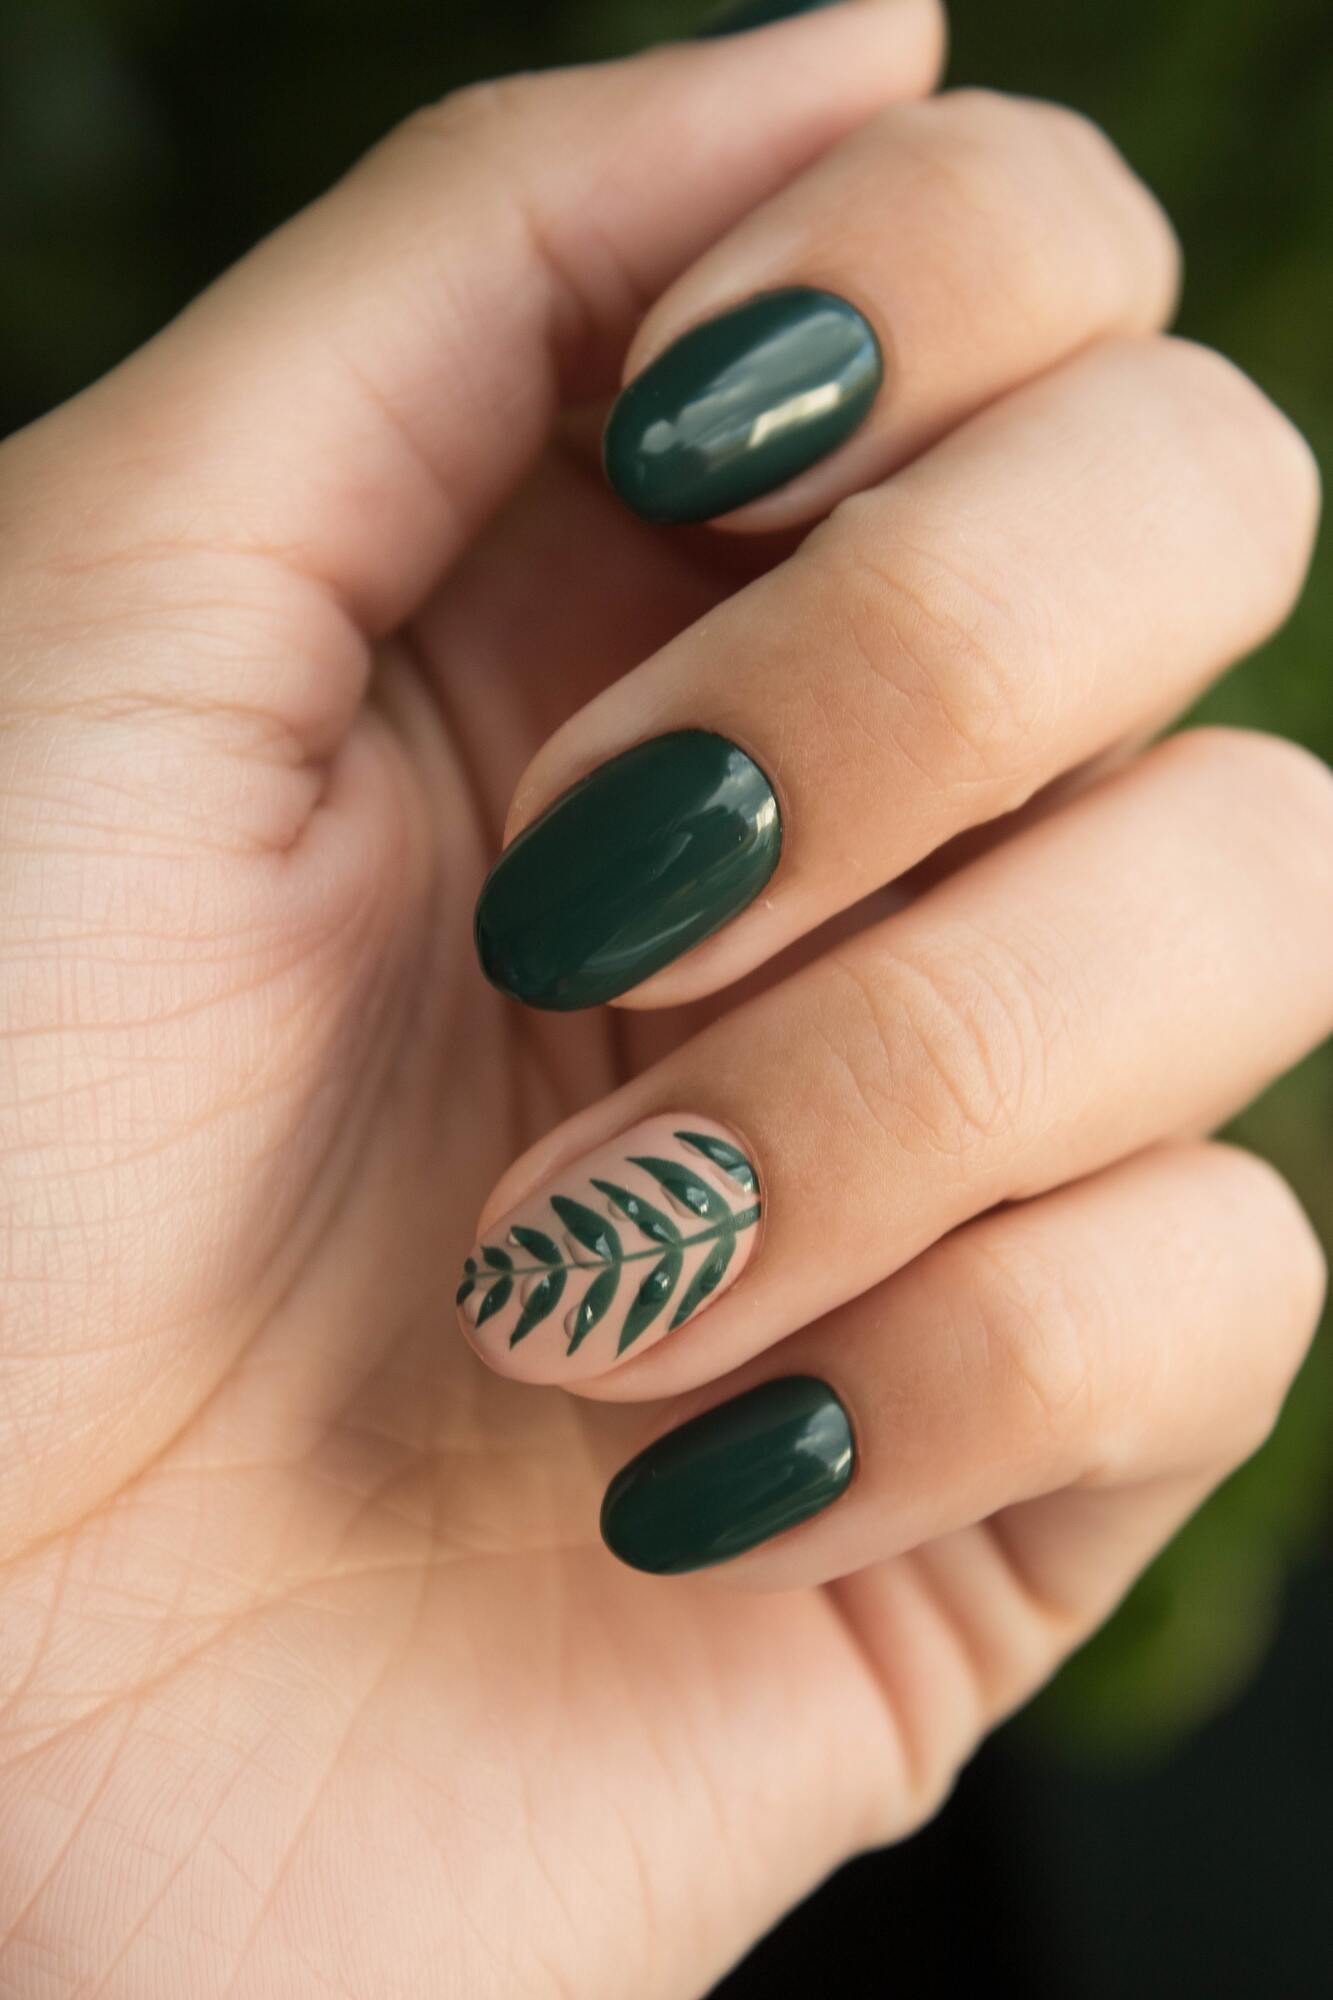 Manicure ideas 2023 - manicure trends - stylish nail designs for summer 2023